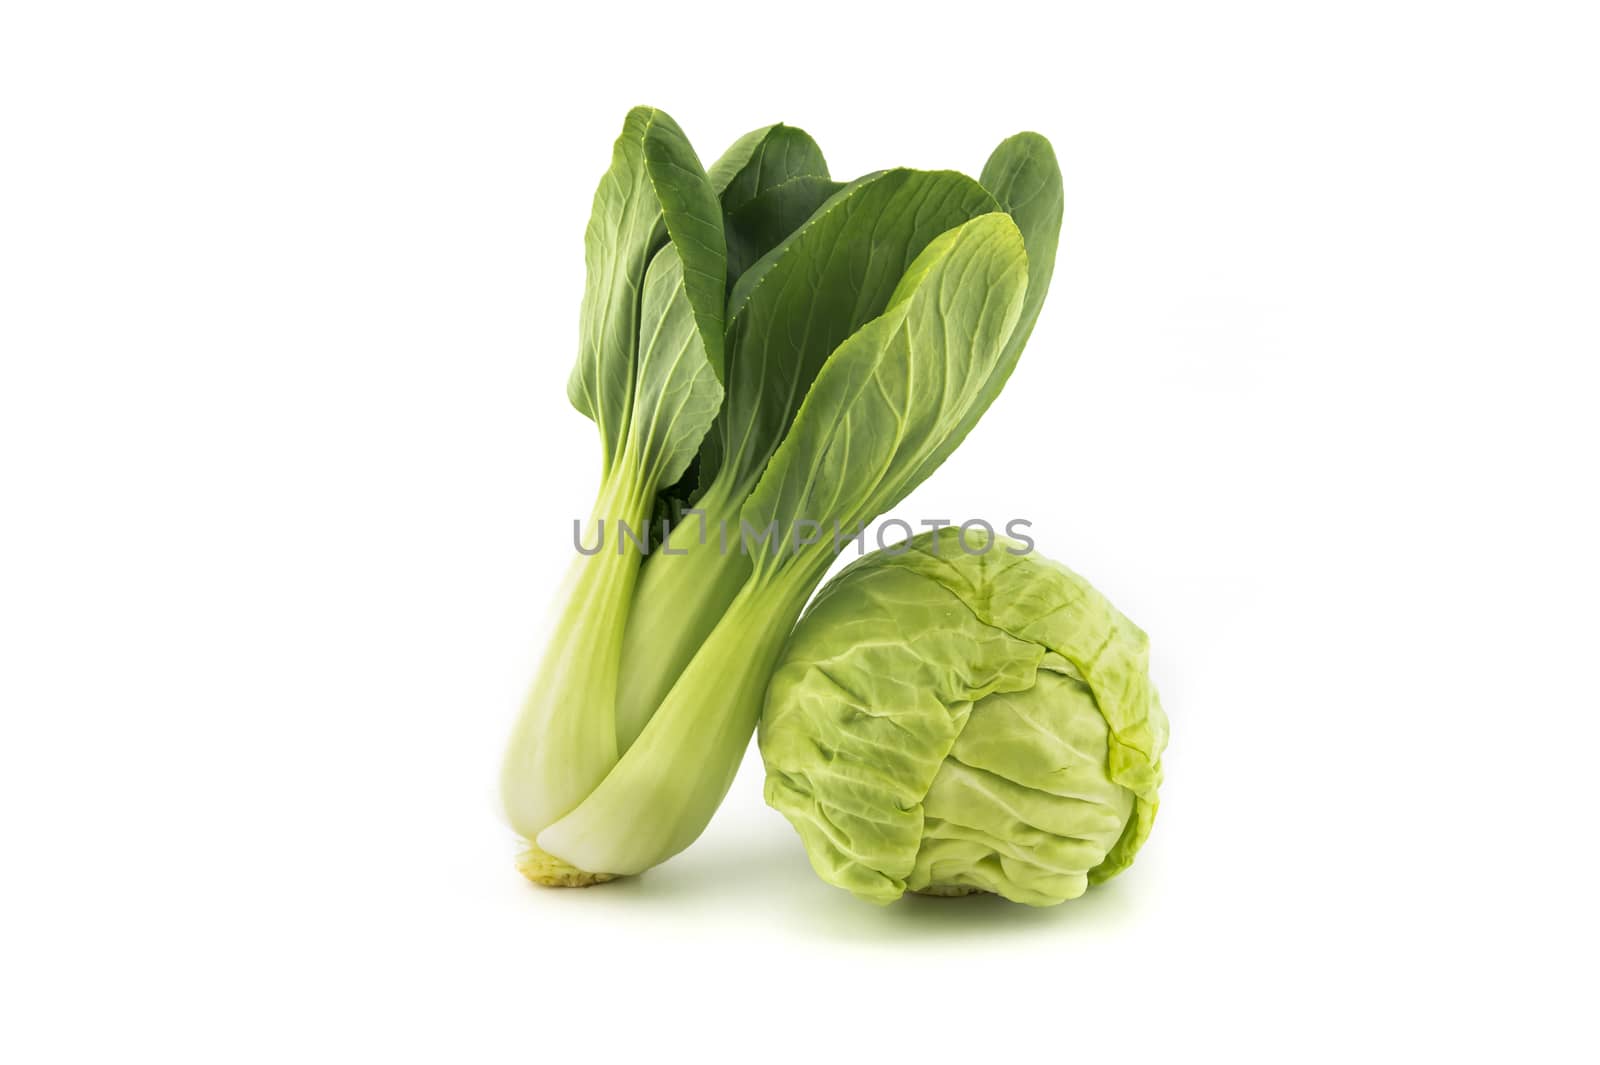 Fresh pak choi cabbage or chinese cabbage and white cabbage isolated on white background